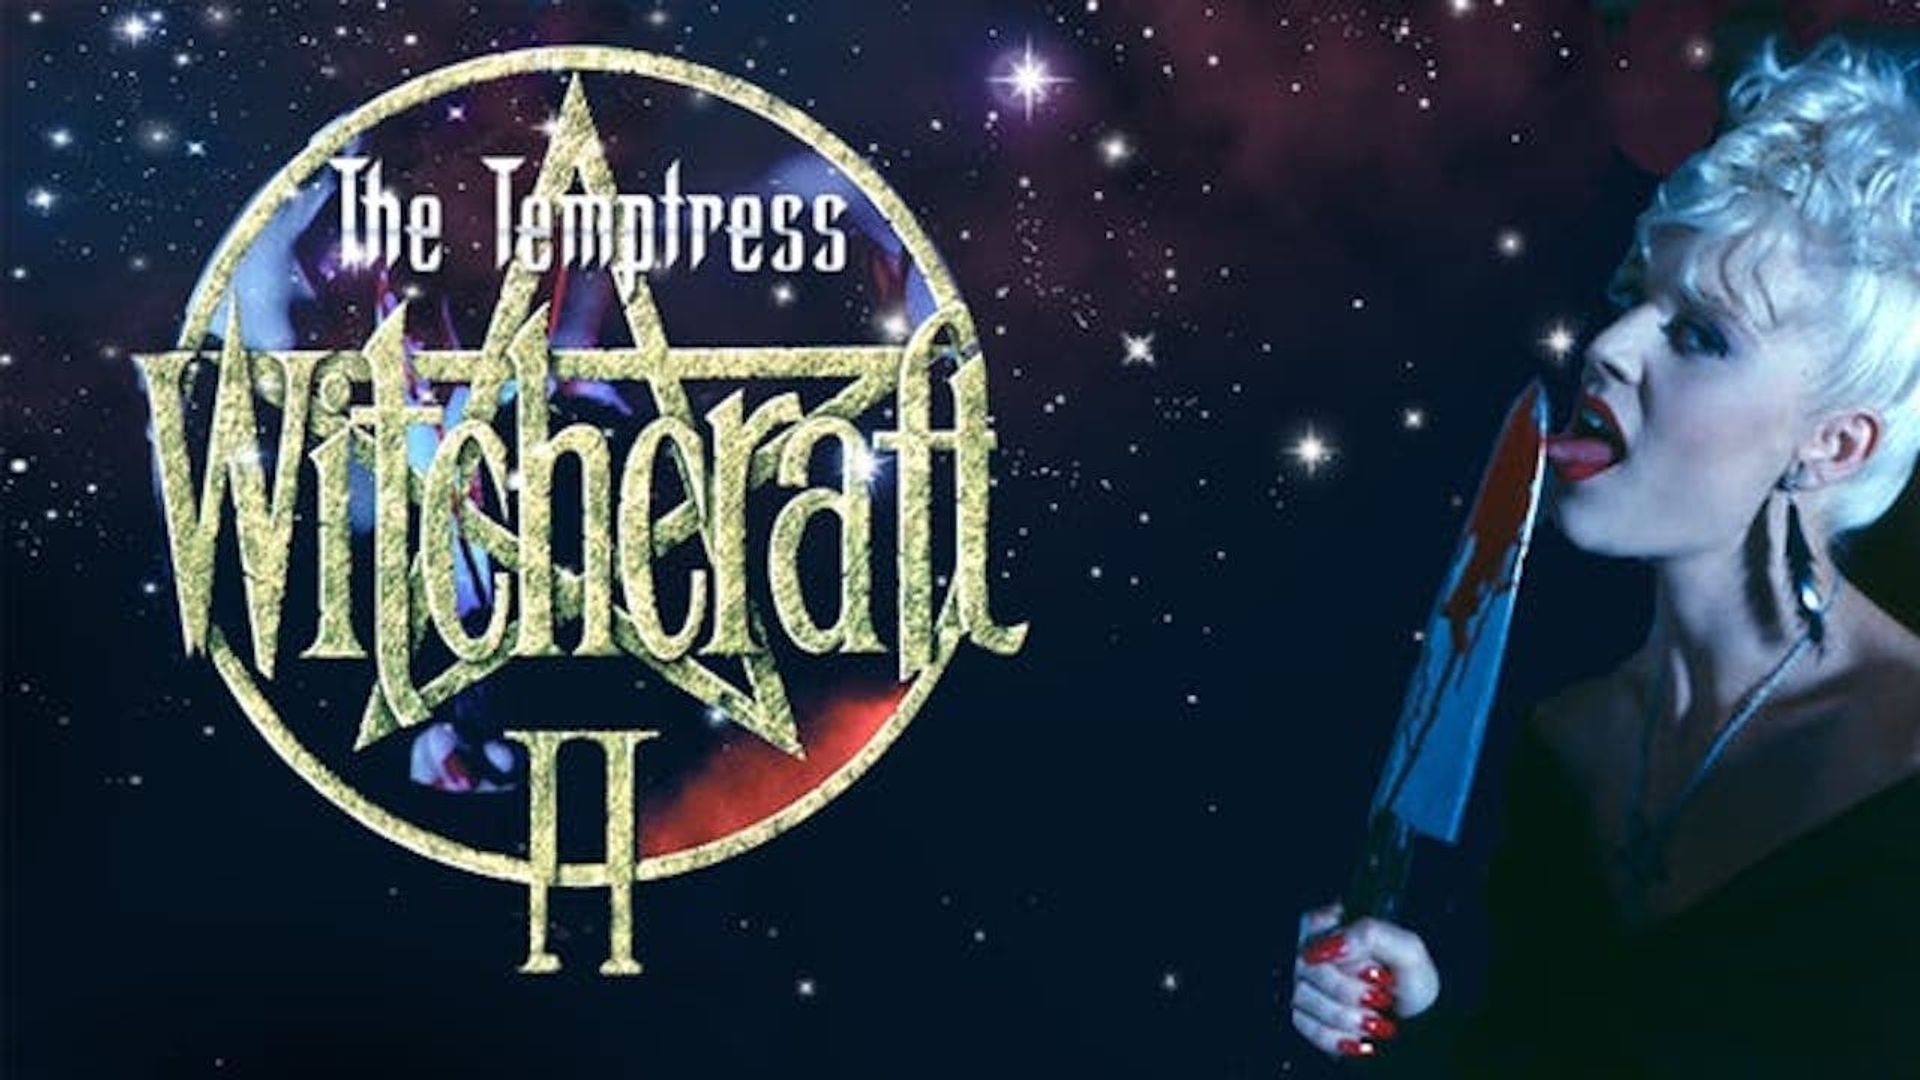 Witchcraft II: The Temptress background